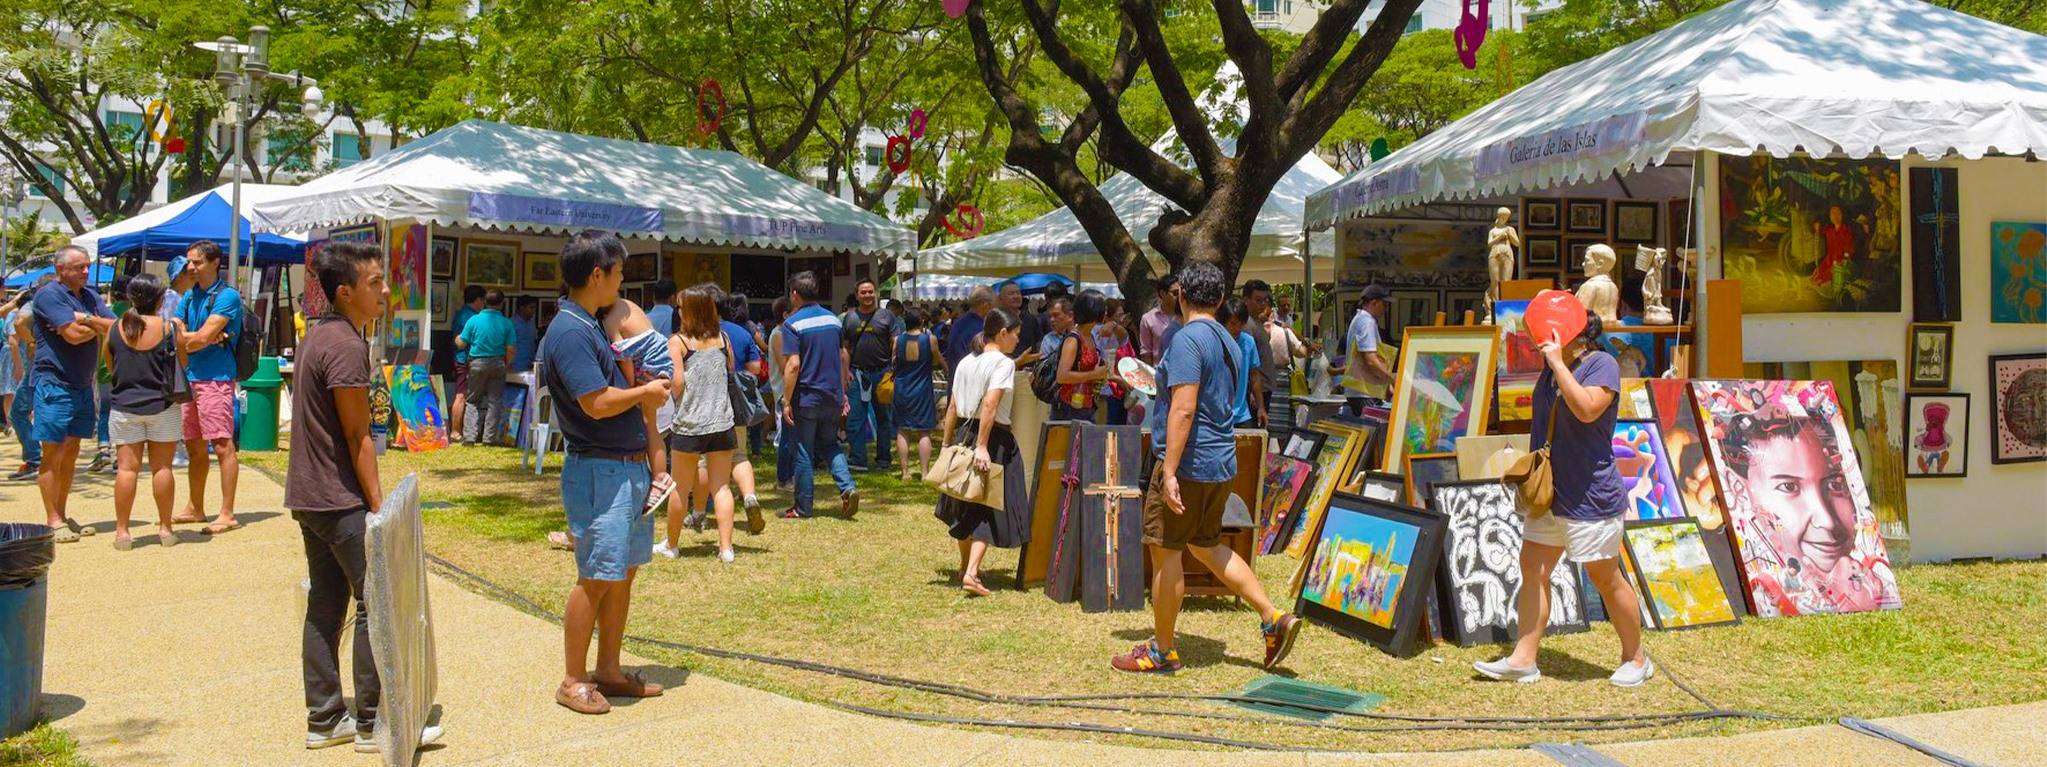 Scenes from Art in the Park 2023 —IMAGES COURTESY OF PHILIPPINE ART EVENTS INC.